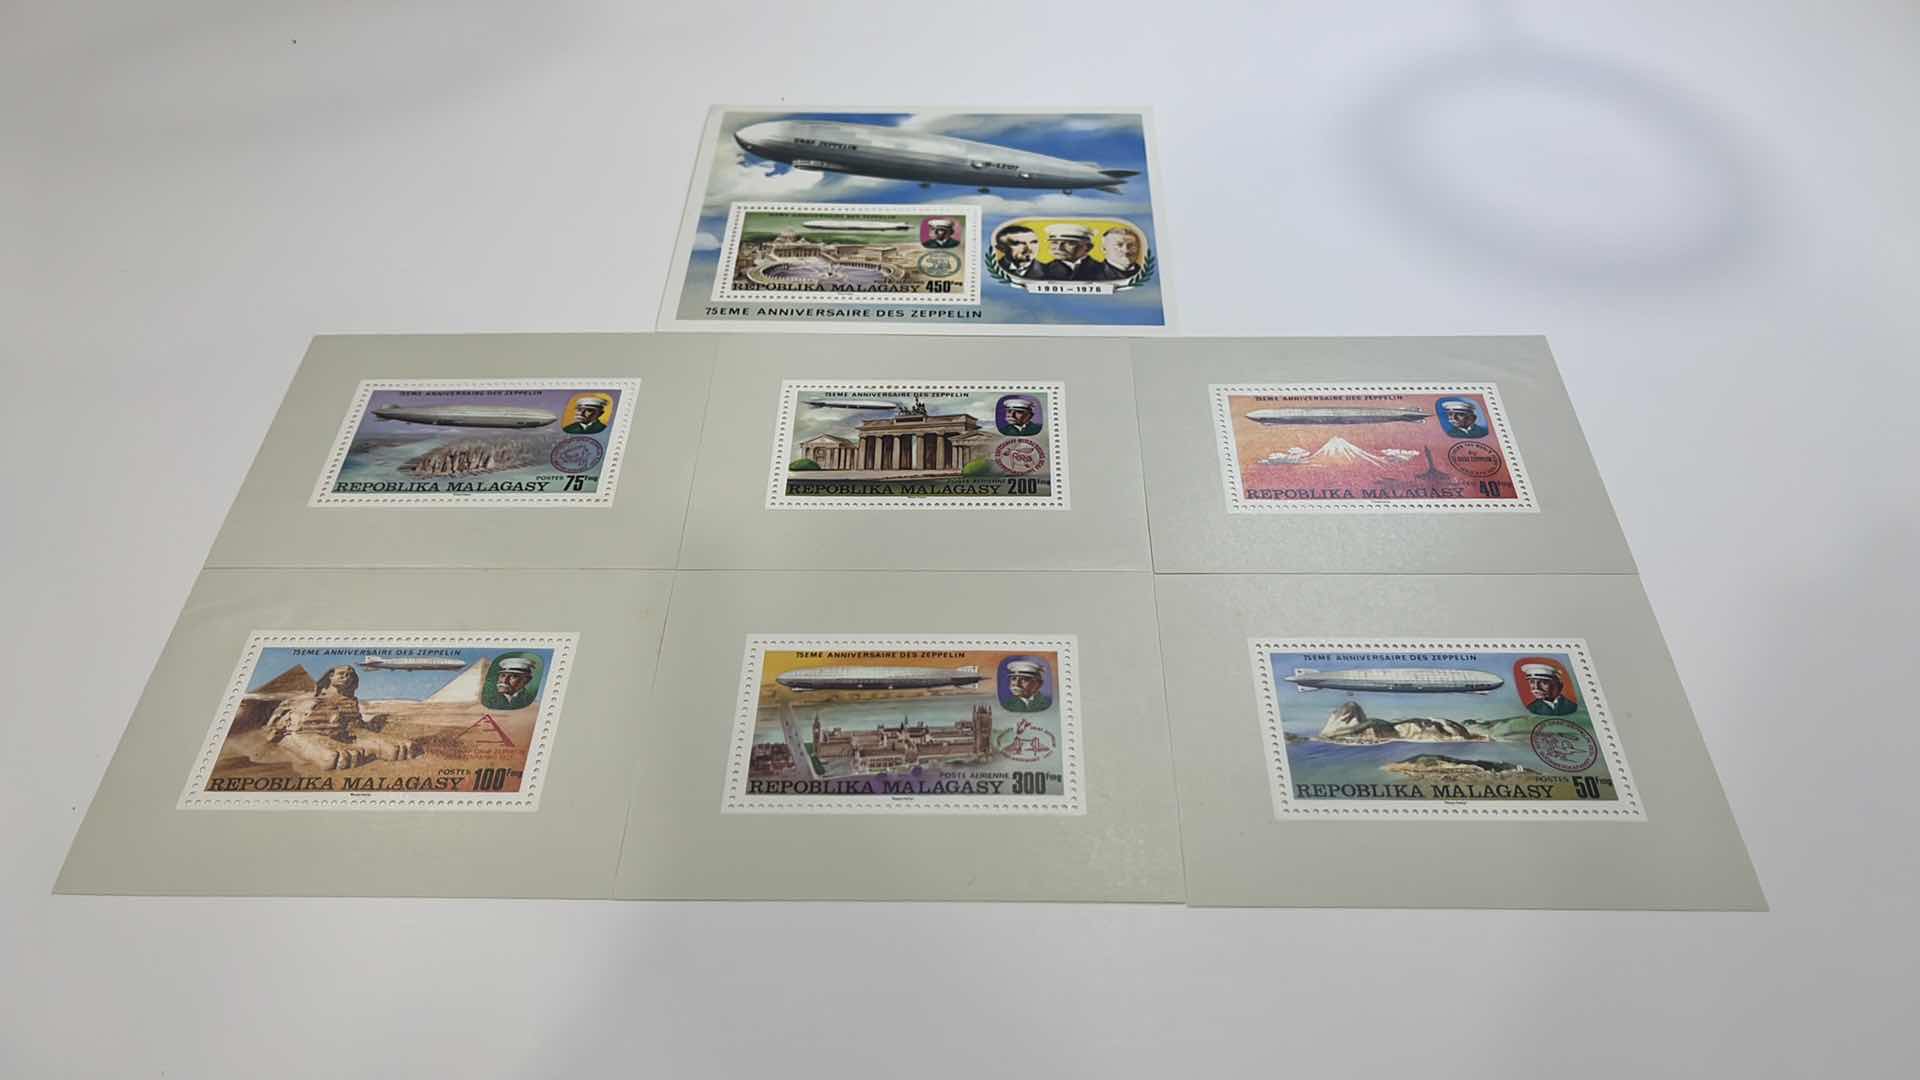 Photo 1 of ZEPPELIN REPUBLIKA MALAGASY 75TH ANNIVERSARY GRAF ZEPPELIN 1901-1976 7 STAMPS